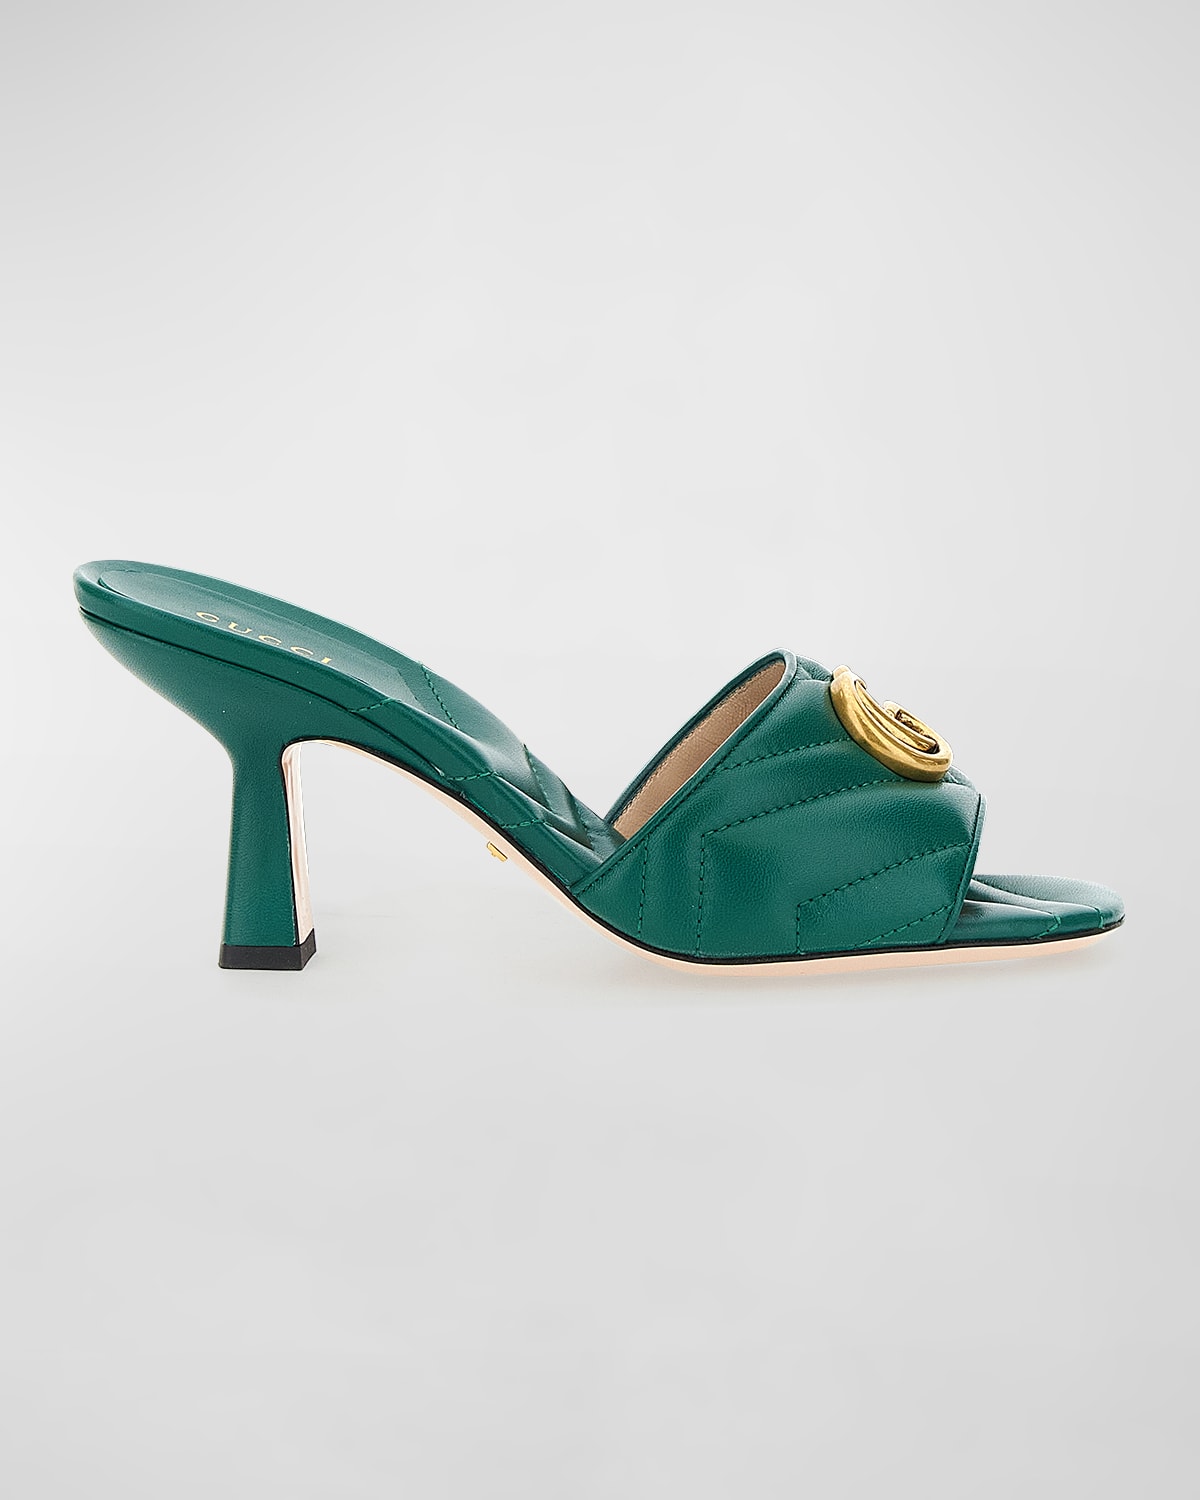 Gucci Marmont Quilted Medallion Mule Sandals In Emerald Green